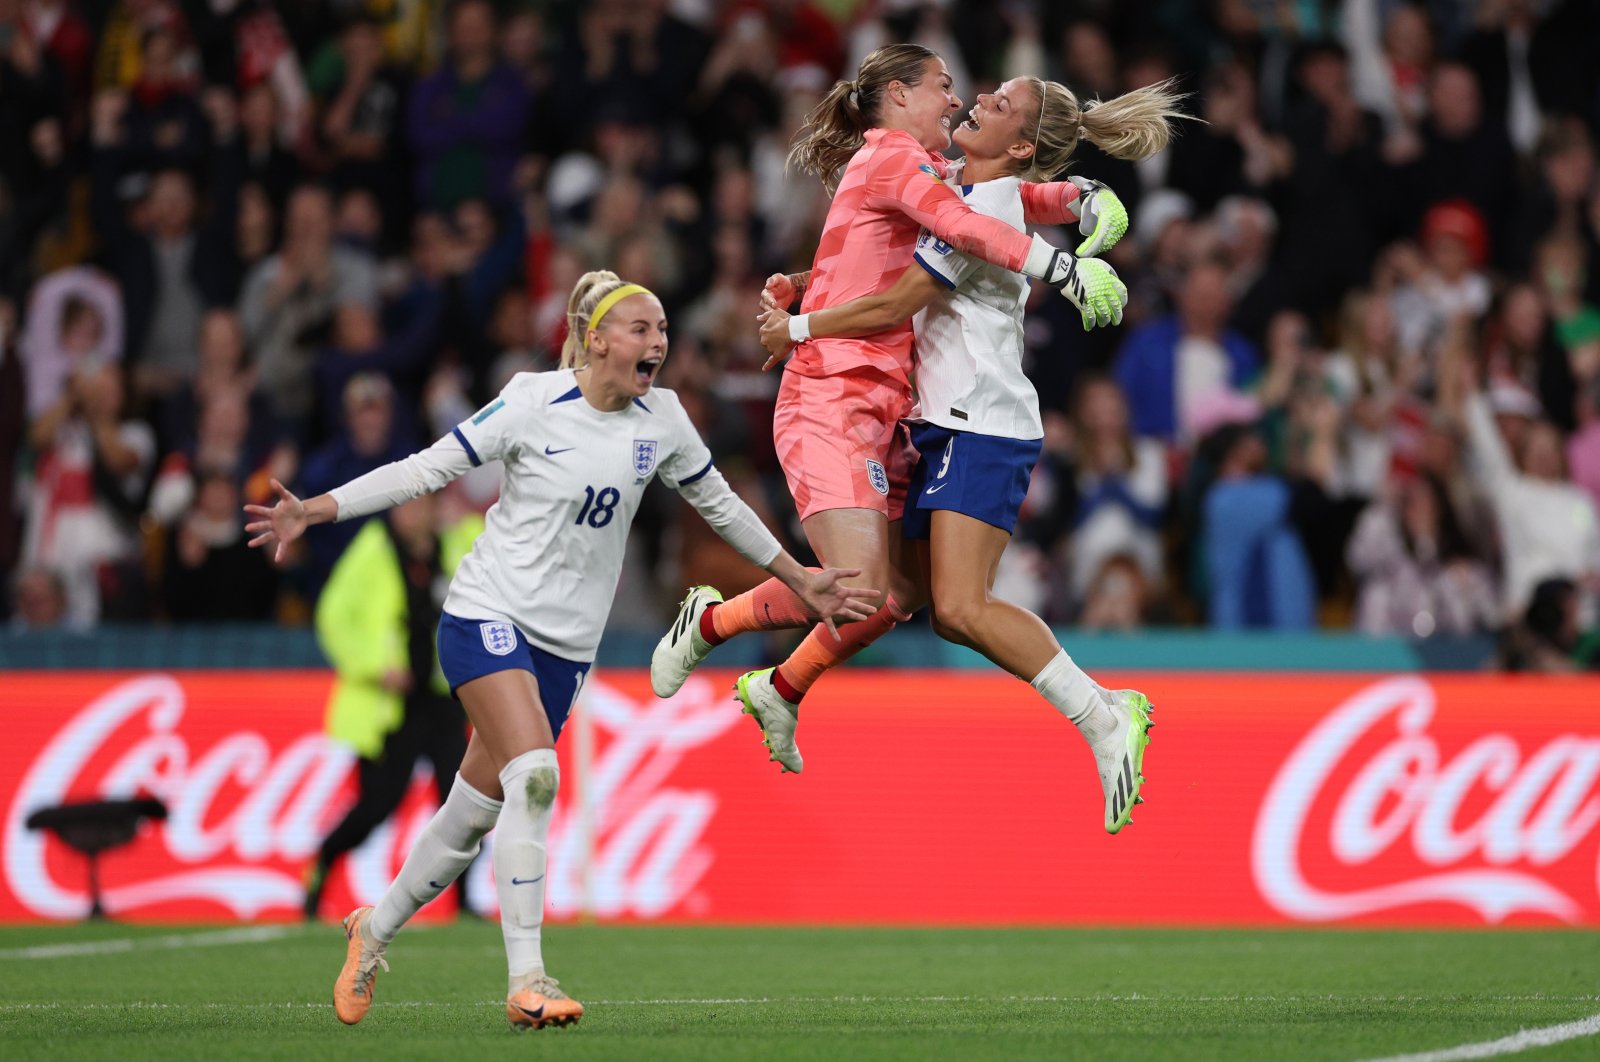 England seize World Cup quarters at Nigeria’s expense, Aussies win